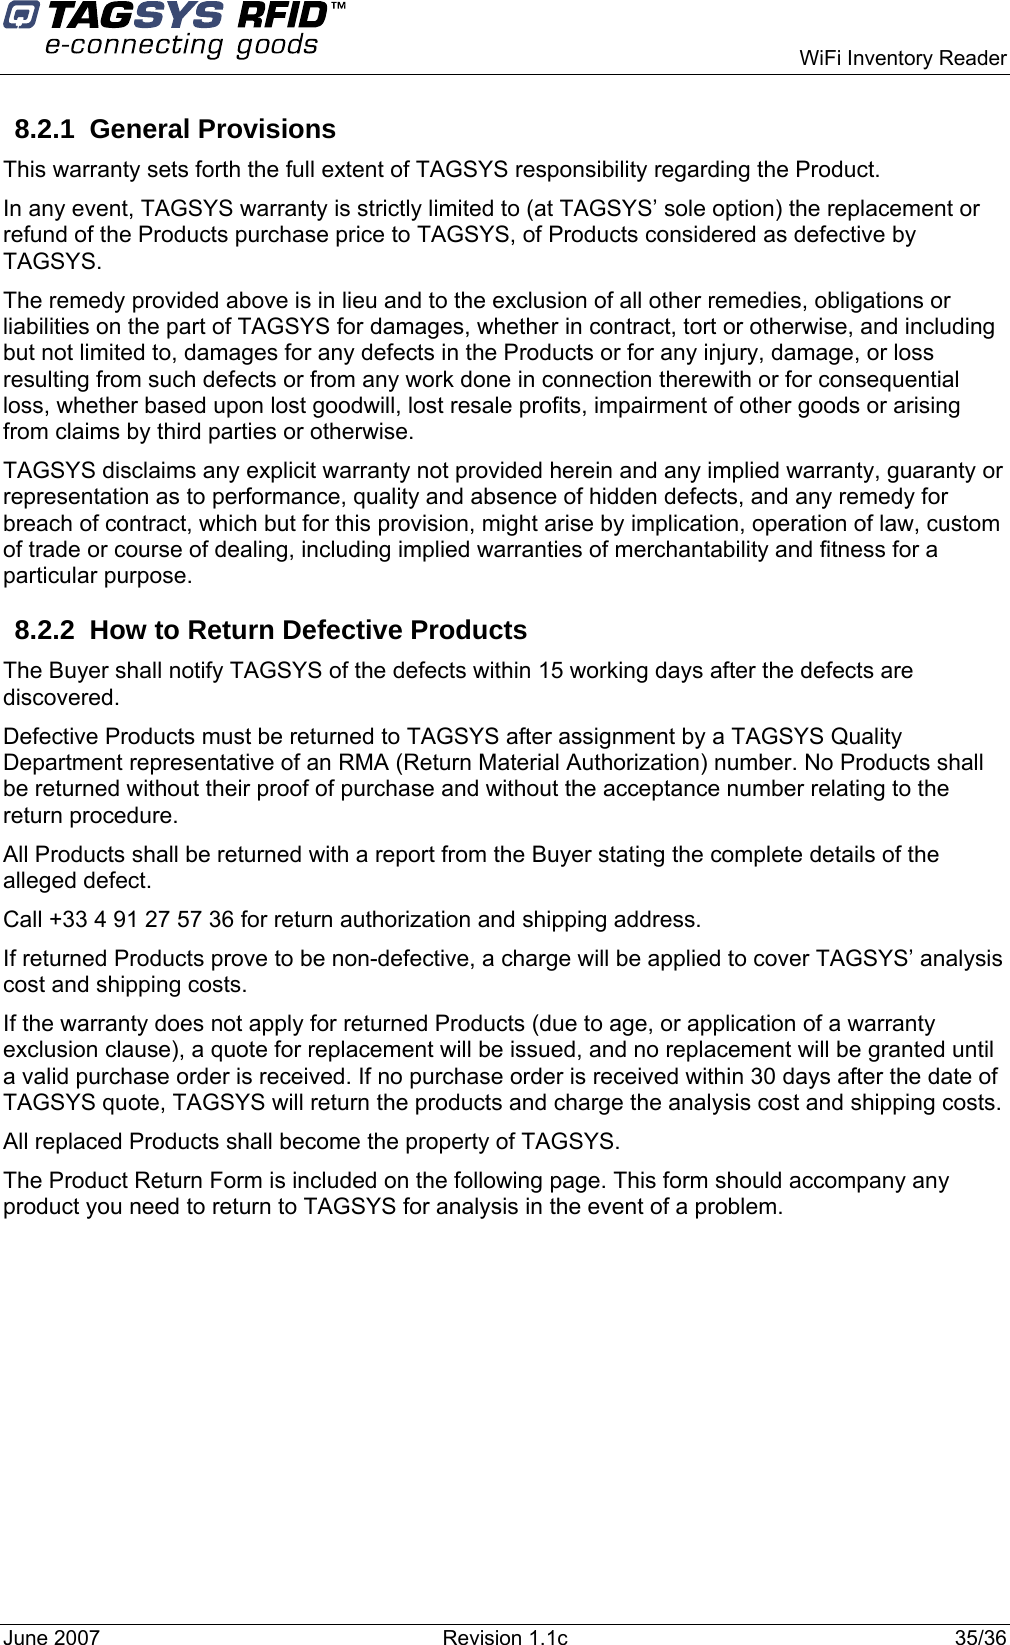    WiFi Inventory Reader 8.2.1 General Provisions This warranty sets forth the full extent of TAGSYS responsibility regarding the Product. In any event, TAGSYS warranty is strictly limited to (at TAGSYS’ sole option) the replacement or refund of the Products purchase price to TAGSYS, of Products considered as defective by TAGSYS. The remedy provided above is in lieu and to the exclusion of all other remedies, obligations or liabilities on the part of TAGSYS for damages, whether in contract, tort or otherwise, and including but not limited to, damages for any defects in the Products or for any injury, damage, or loss resulting from such defects or from any work done in connection therewith or for consequential loss, whether based upon lost goodwill, lost resale profits, impairment of other goods or arising from claims by third parties or otherwise. TAGSYS disclaims any explicit warranty not provided herein and any implied warranty, guaranty or representation as to performance, quality and absence of hidden defects, and any remedy for breach of contract, which but for this provision, might arise by implication, operation of law, custom of trade or course of dealing, including implied warranties of merchantability and fitness for a particular purpose. 8.2.2  How to Return Defective Products The Buyer shall notify TAGSYS of the defects within 15 working days after the defects are discovered. Defective Products must be returned to TAGSYS after assignment by a TAGSYS Quality Department representative of an RMA (Return Material Authorization) number. No Products shall be returned without their proof of purchase and without the acceptance number relating to the return procedure. All Products shall be returned with a report from the Buyer stating the complete details of the alleged defect. Call +33 4 91 27 57 36 for return authorization and shipping address. If returned Products prove to be non-defective, a charge will be applied to cover TAGSYS’ analysis cost and shipping costs. If the warranty does not apply for returned Products (due to age, or application of a warranty exclusion clause), a quote for replacement will be issued, and no replacement will be granted until a valid purchase order is received. If no purchase order is received within 30 days after the date of TAGSYS quote, TAGSYS will return the products and charge the analysis cost and shipping costs. All replaced Products shall become the property of TAGSYS. The Product Return Form is included on the following page. This form should accompany any product you need to return to TAGSYS for analysis in the event of a problem.June 2007  Revision 1.1c  35/36  